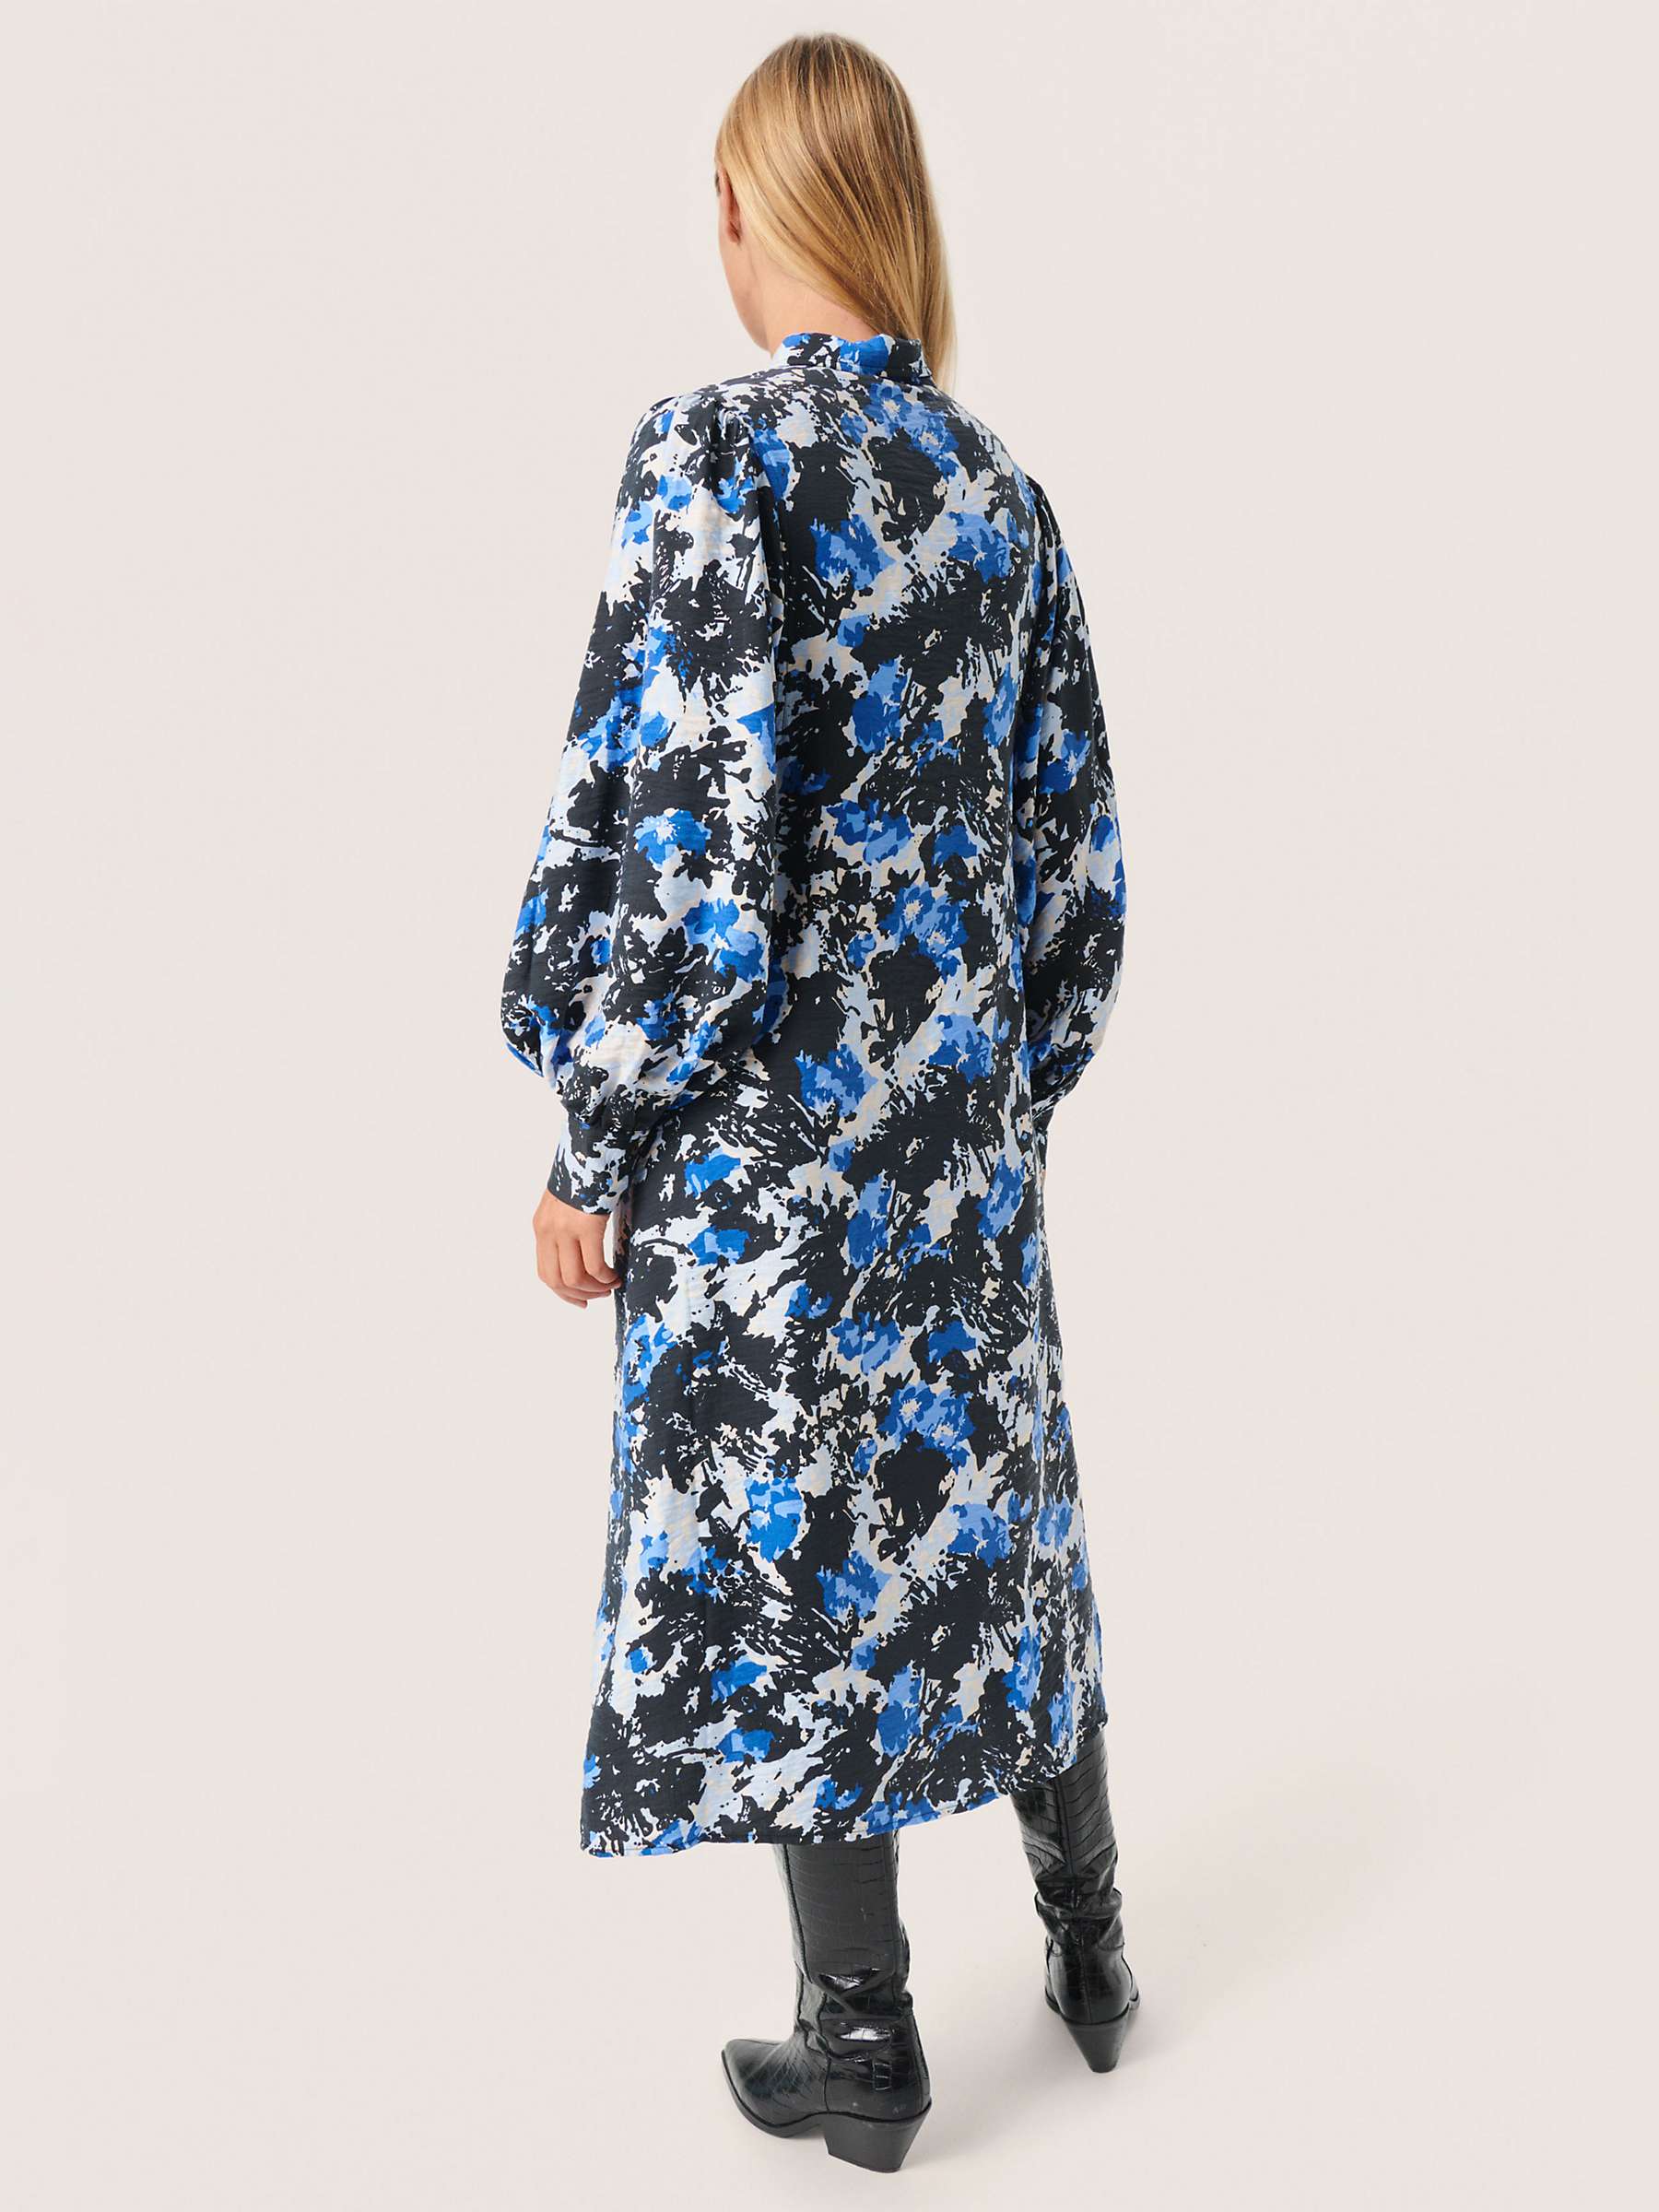 Buy Soaked In Luxury Nicasia Shirt Dress, Beaucoup Ditzy Online at johnlewis.com